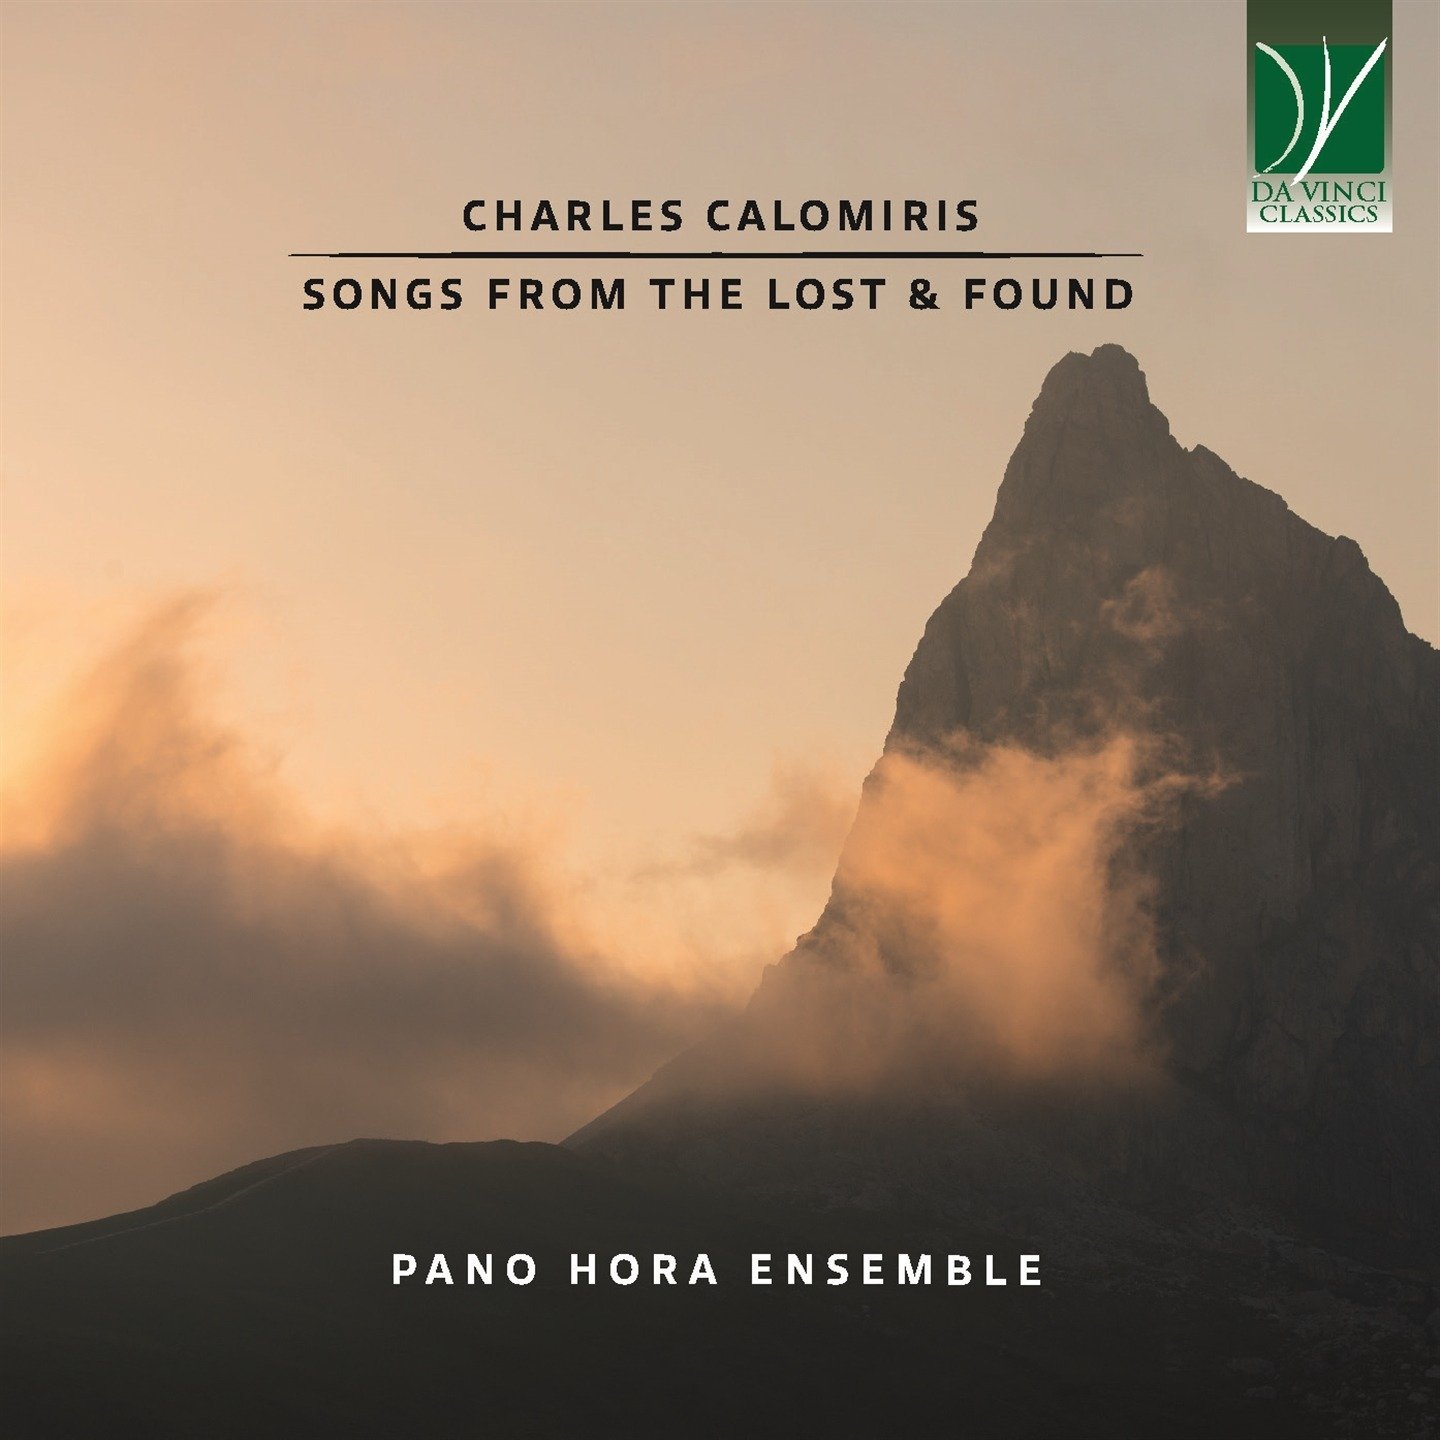 CD Shop - PANO HORA ENSEMBLE CHARLES CALOMIRIS: SONGS FROM THE LOST & FOUND